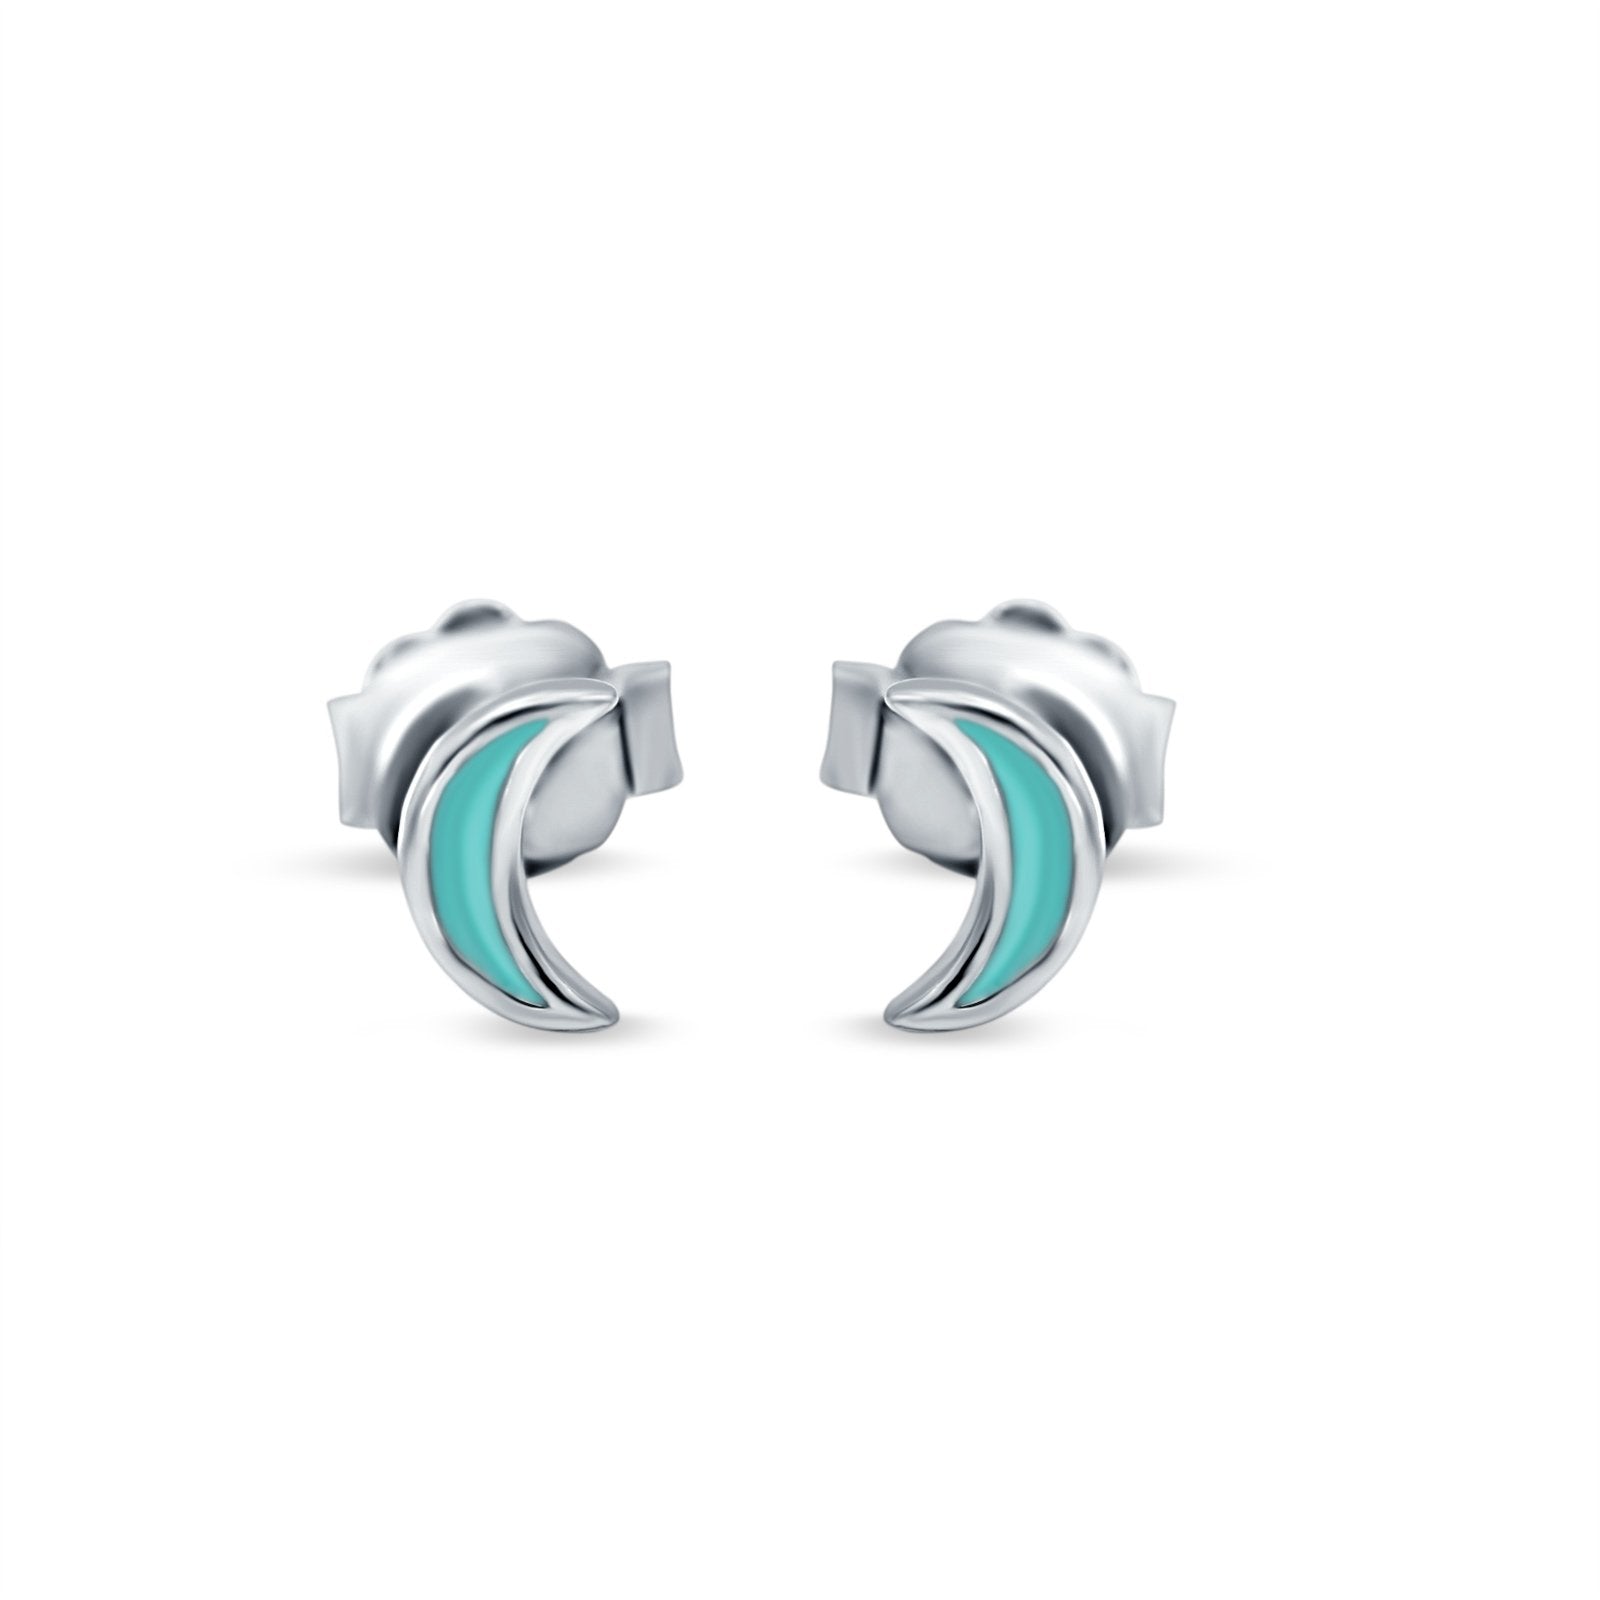 Tiny Crescent Moon New Design Stud Earrings 925 Sterling Silver